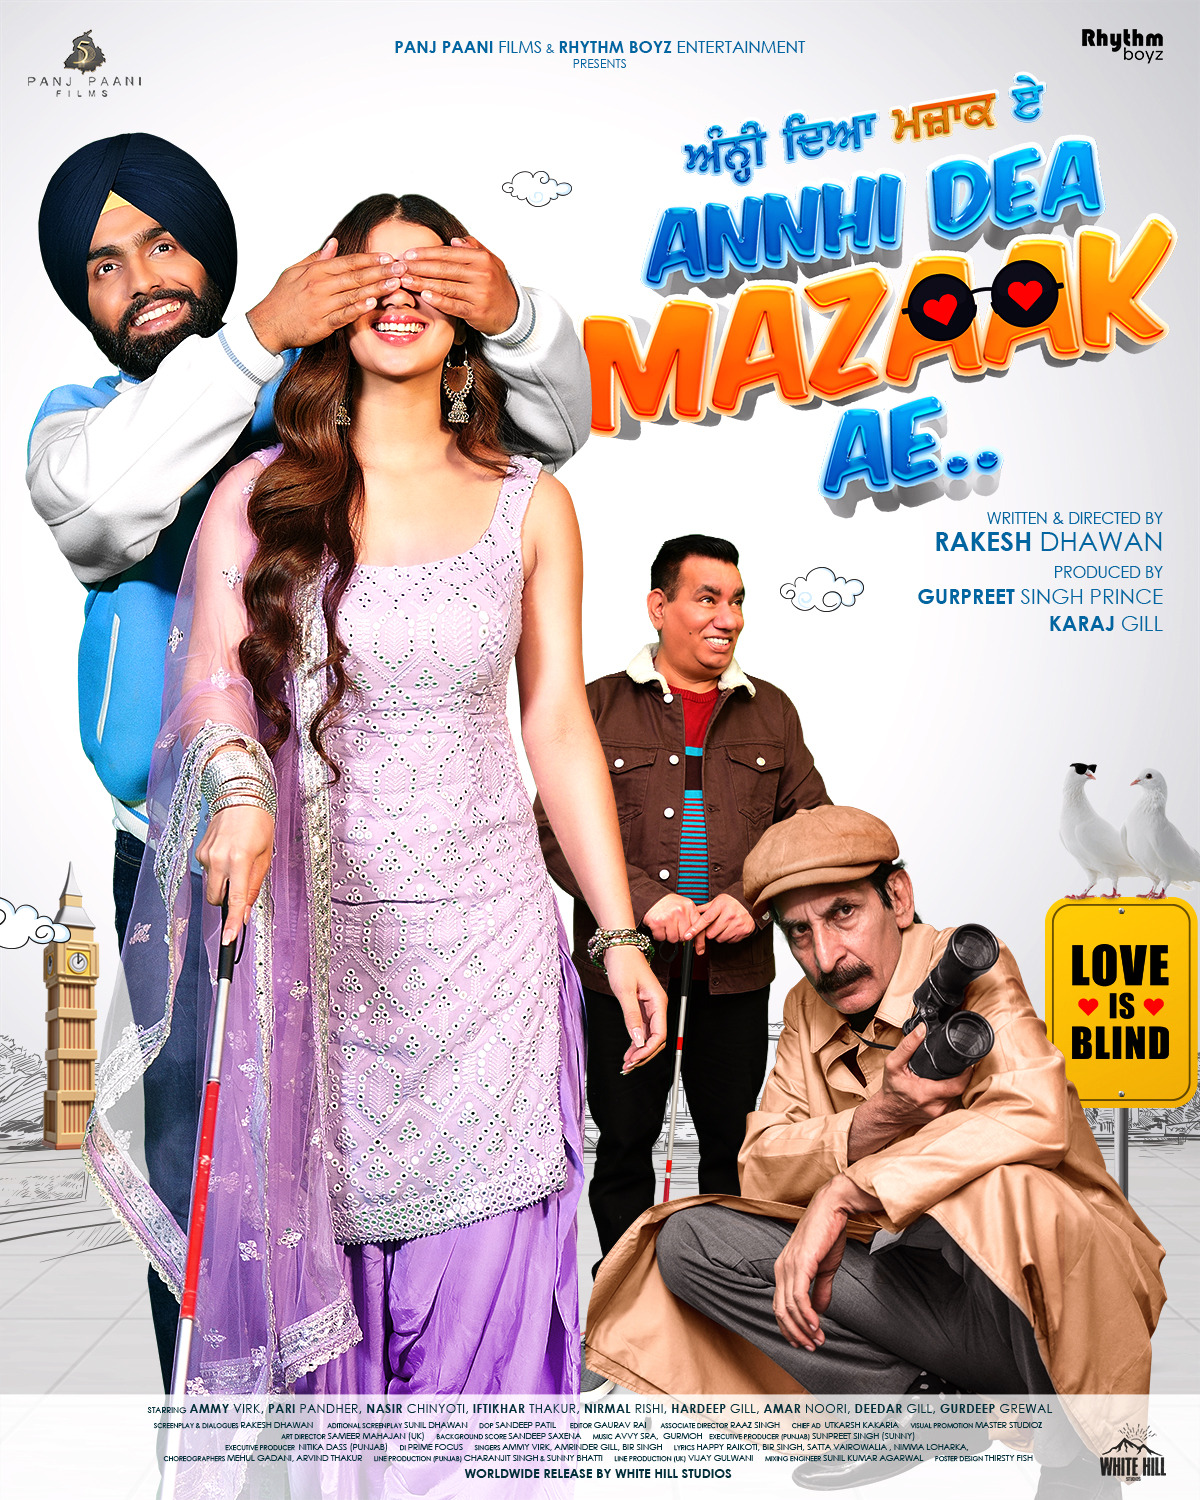 Extra Large Movie Poster Image for Annhi Dea Mazaak Ae (#2 of 3)